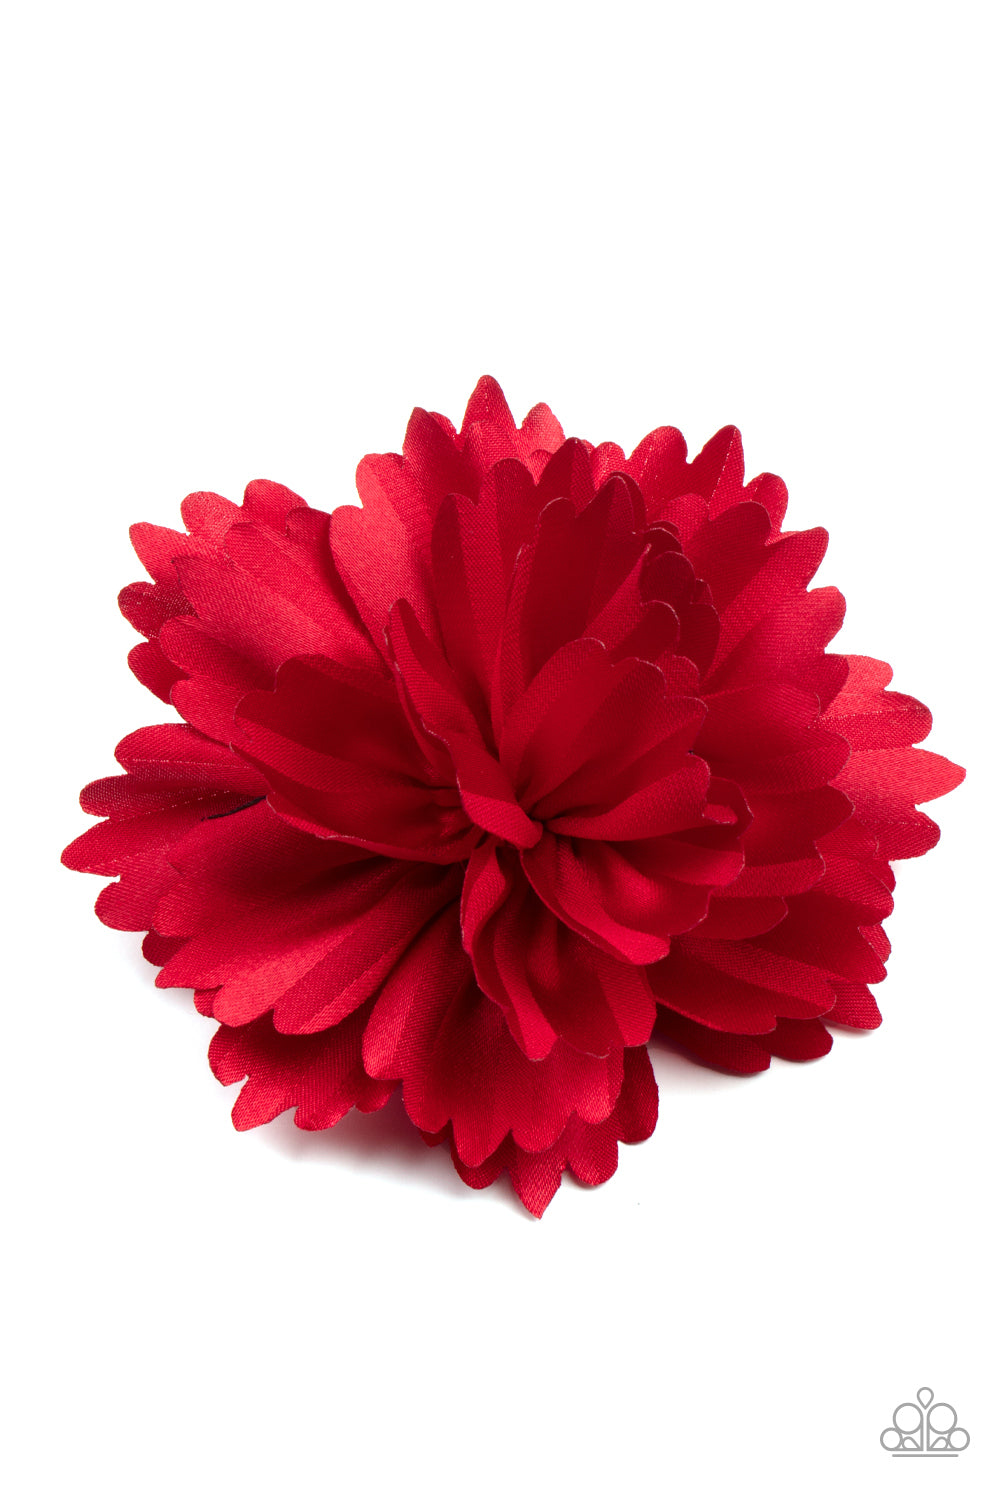 Cutest lil hair flower you ever did see • Layers of scalloped red petals gather into an elegant satin blossom, creating a timeless display. Features a standard hair clip on the back.